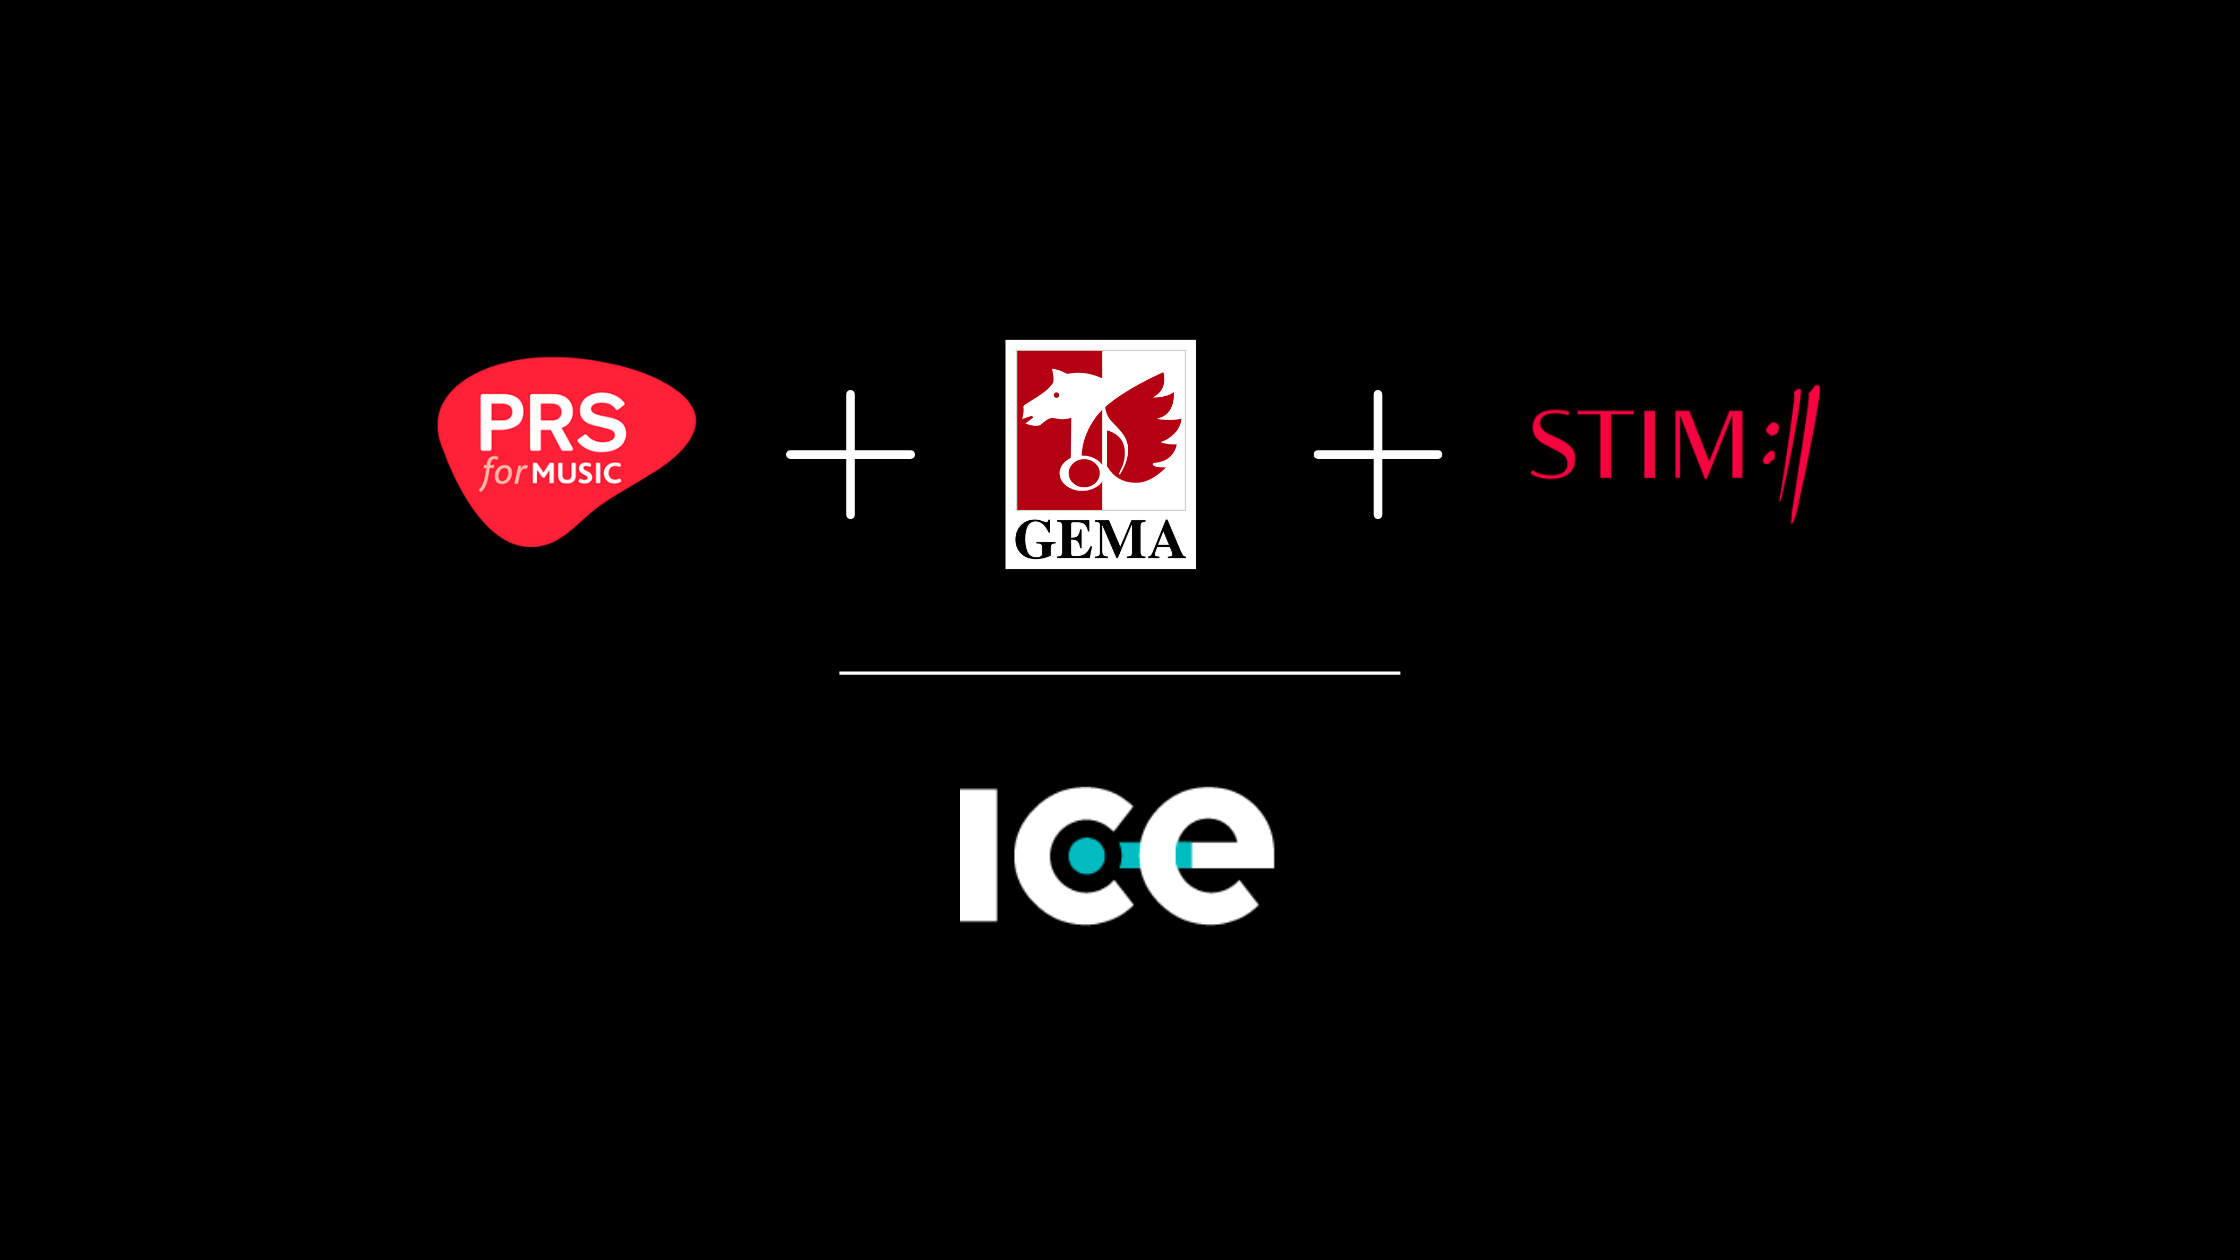 How PRS, STIM, and GEMA collect royalties from Facebook and YouTube